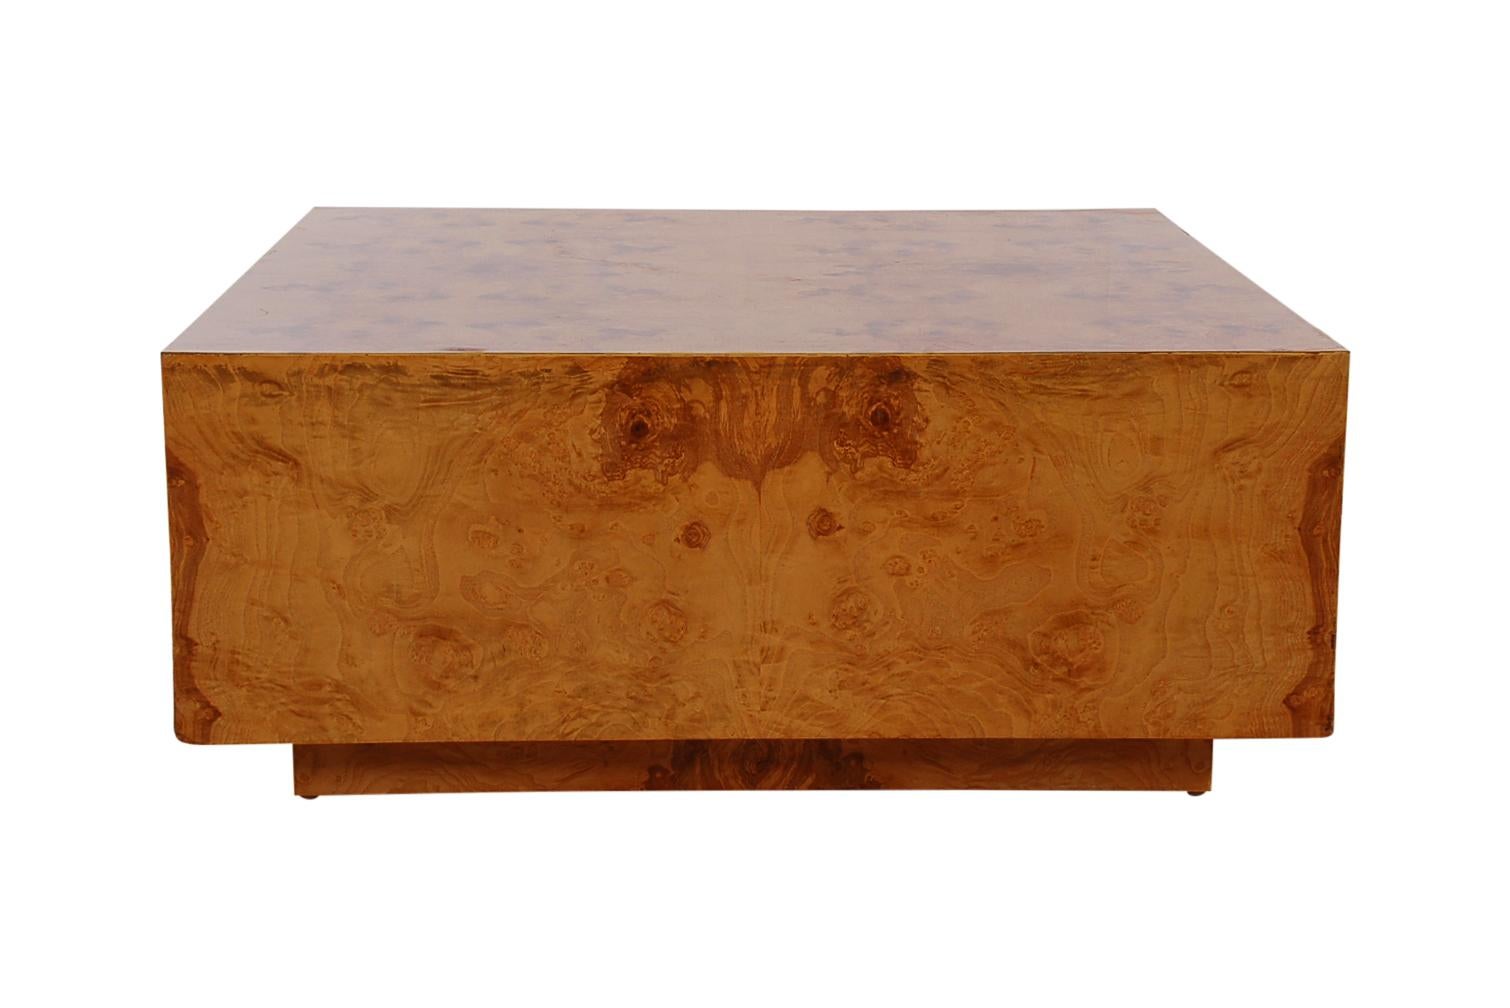 American Mid-Century Modern Square Burl Wood Cocktail or Side Table by Milo Baughman